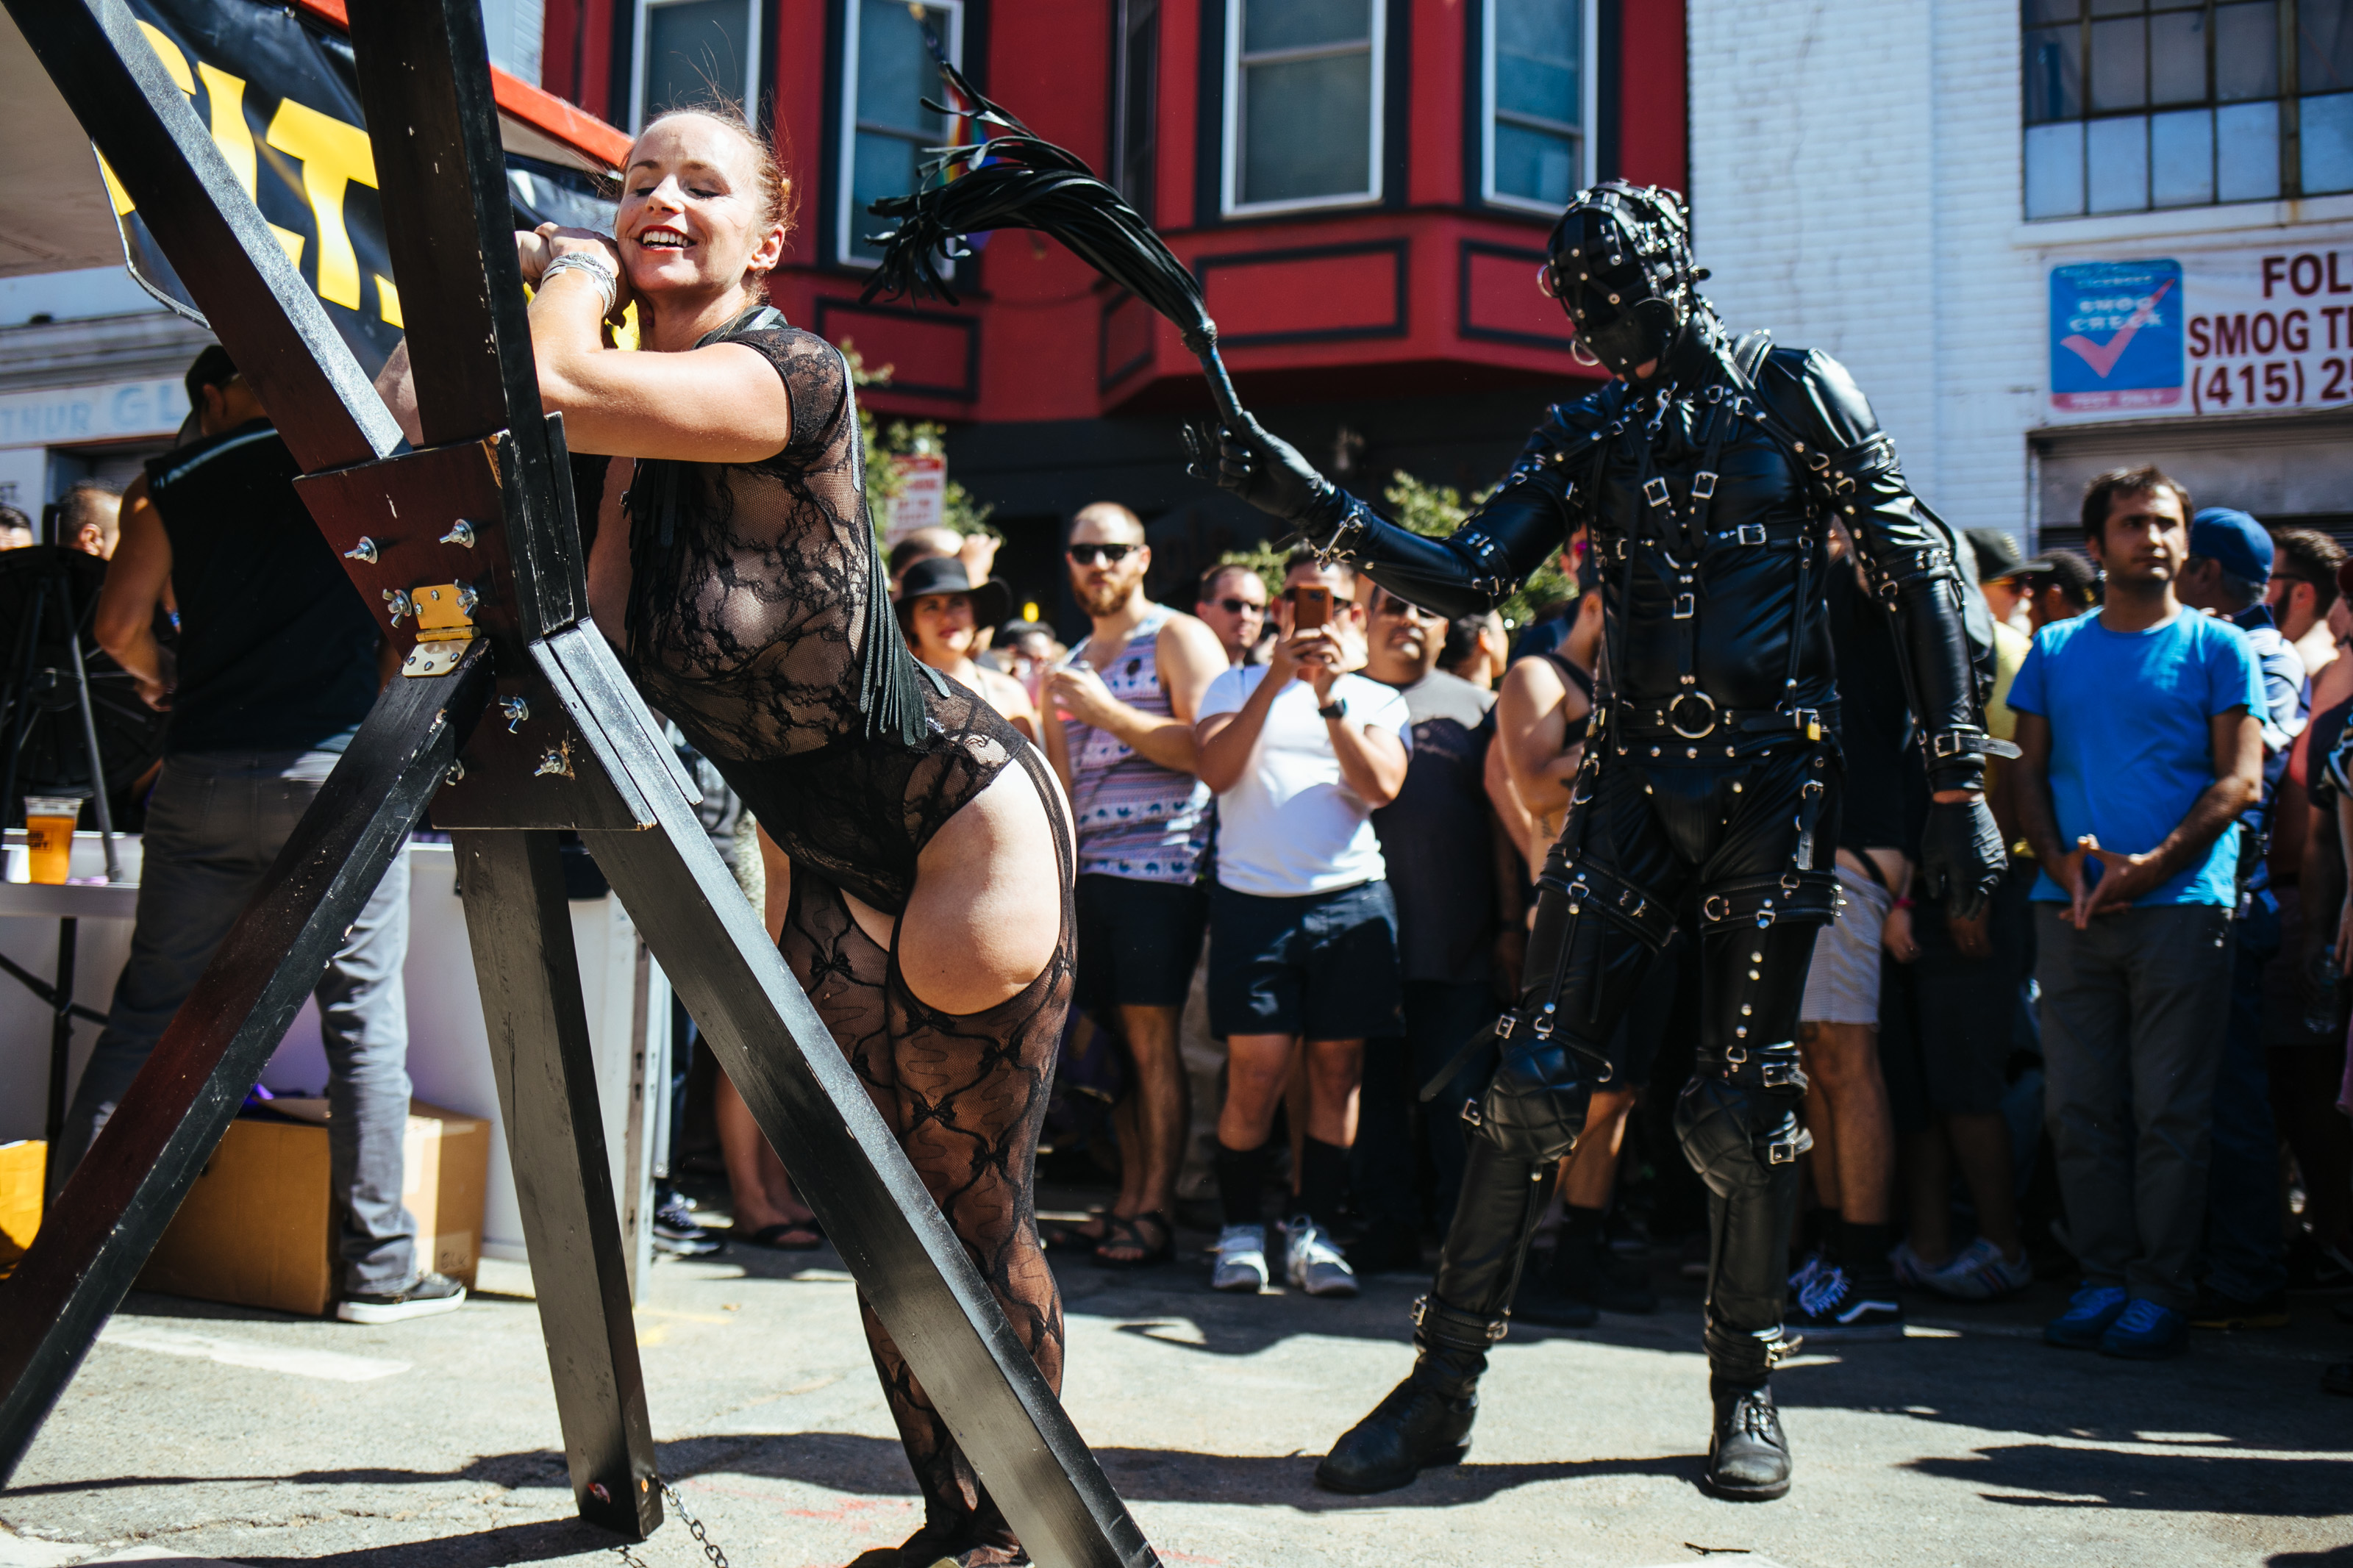 cindy boehmer recommends folsom street fair images pic